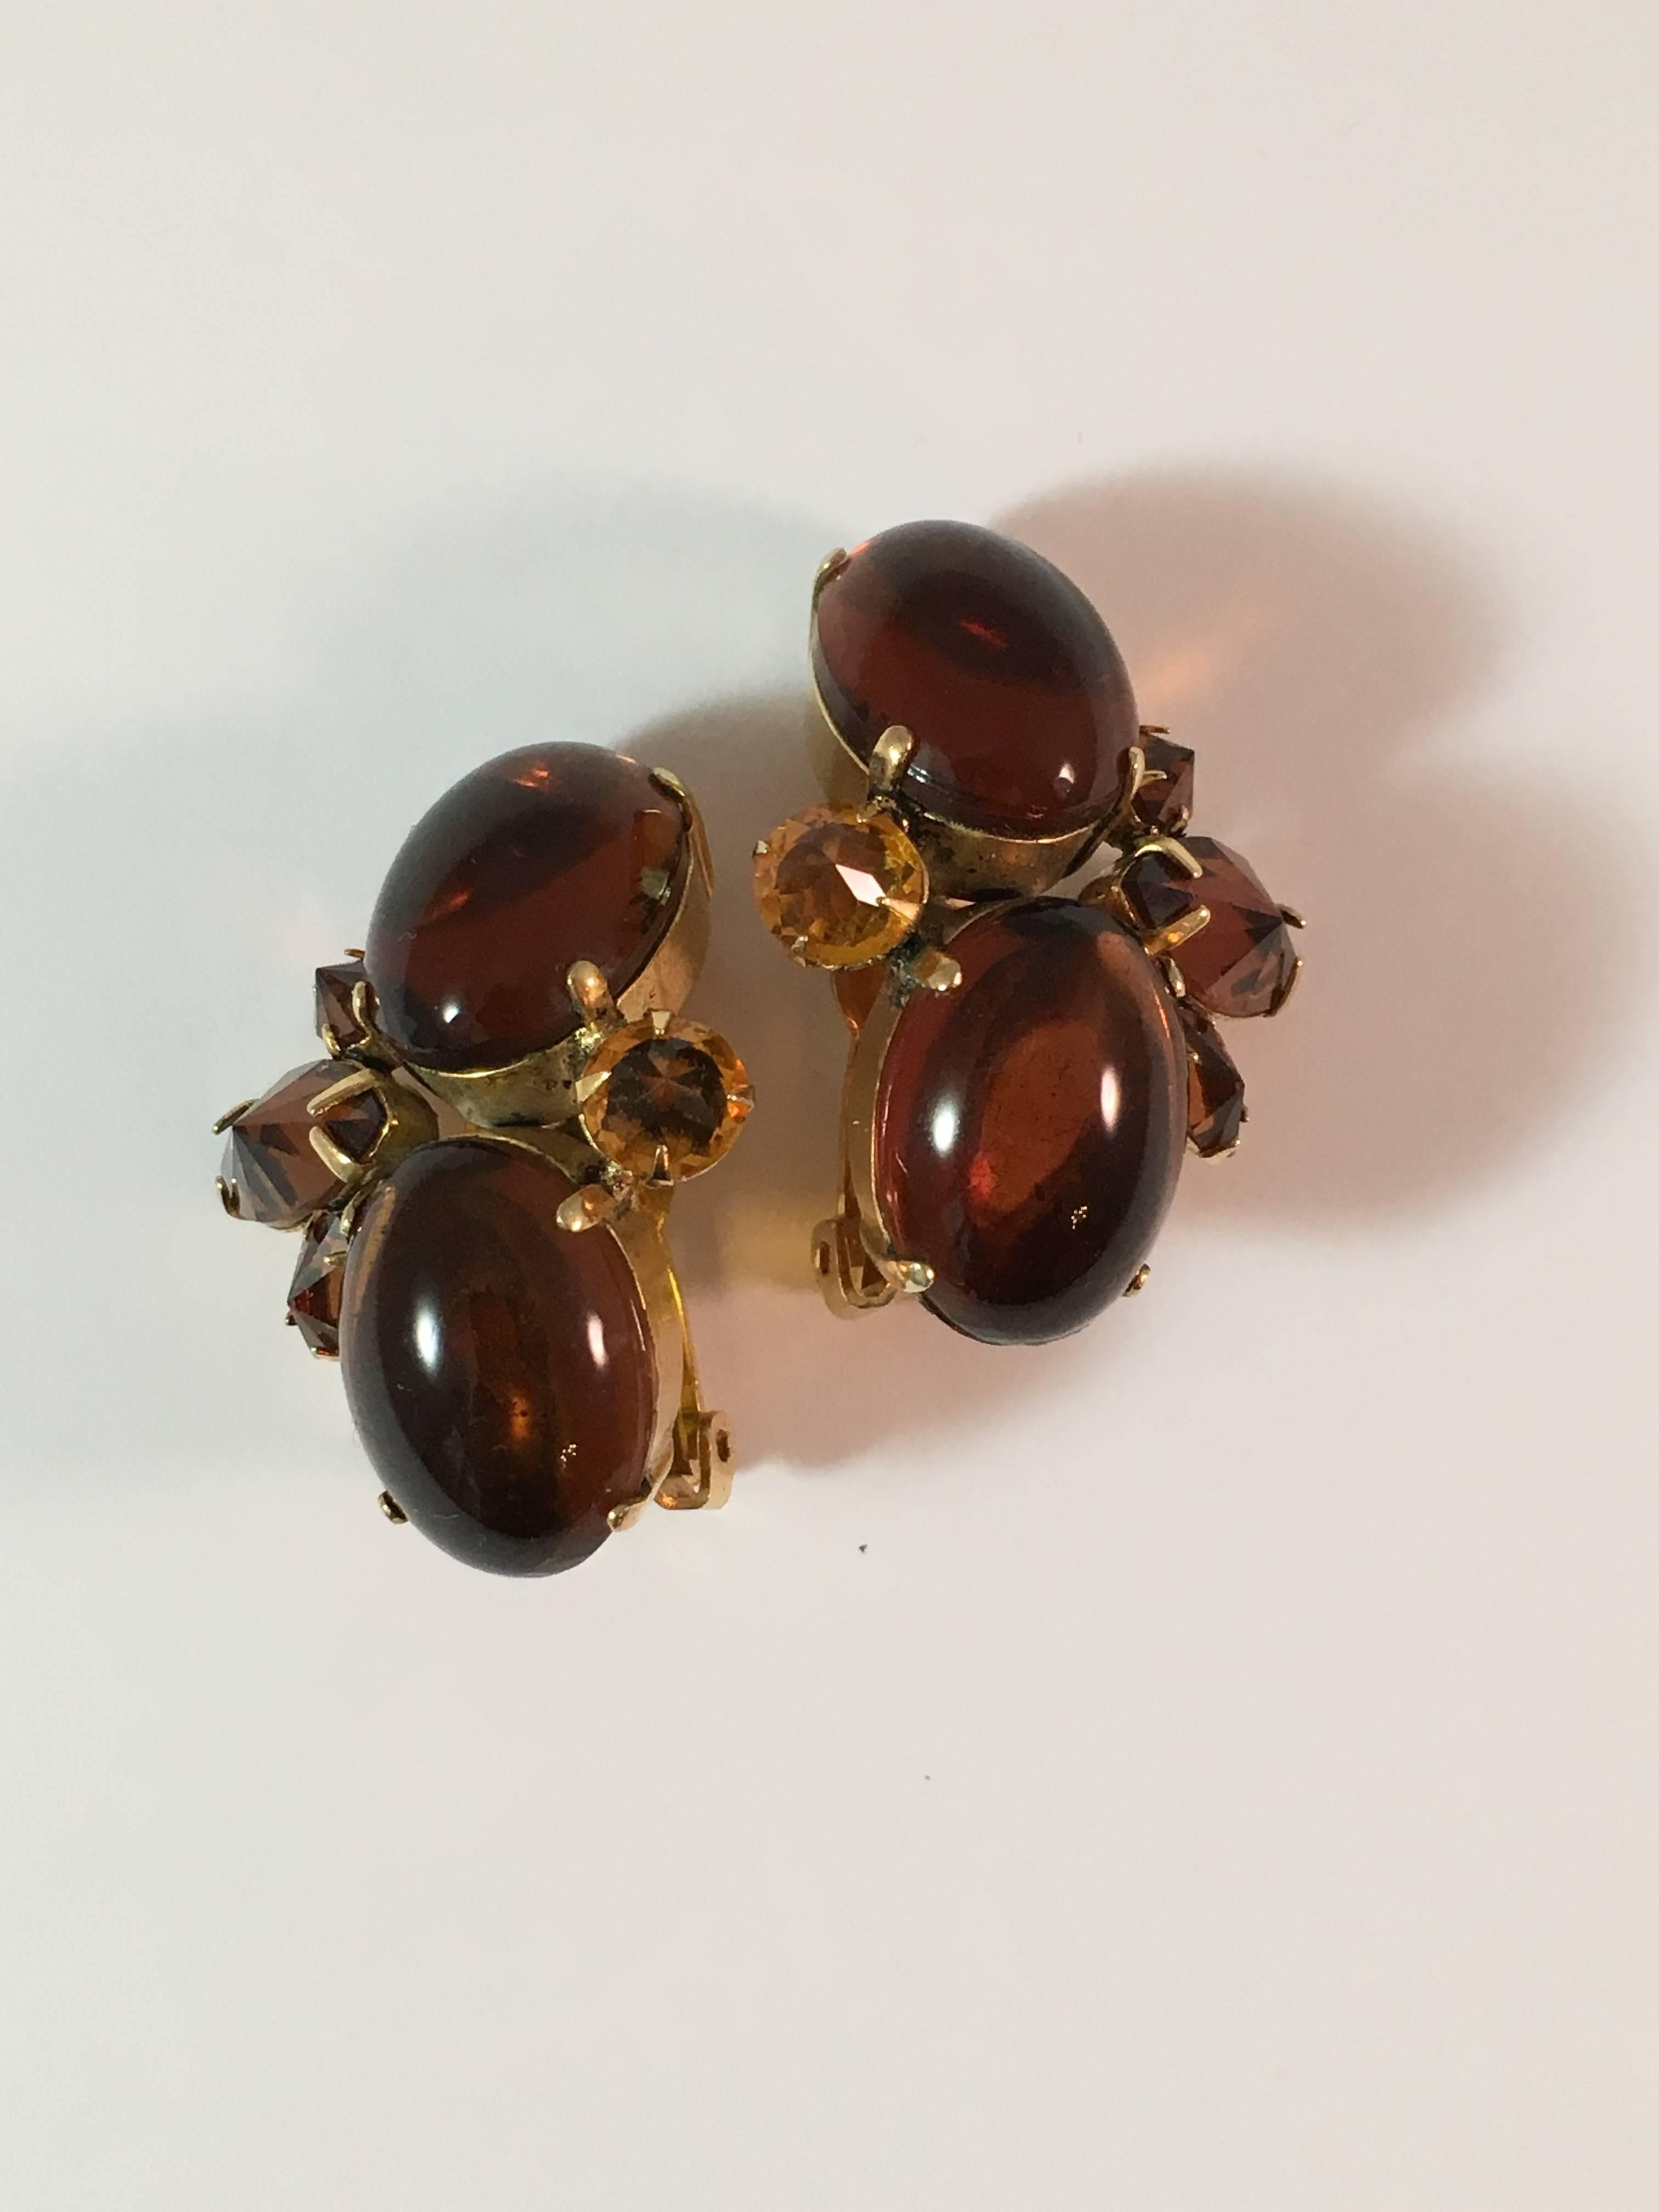 This is a beautiful pair of 1950s Schreiner clip-on earrings. They are gold-toned metal set with brown and dark yellow glass crystals. The two side baguettes on each earring are set with the pointed side up - a Schreiner trademark. They measure 1